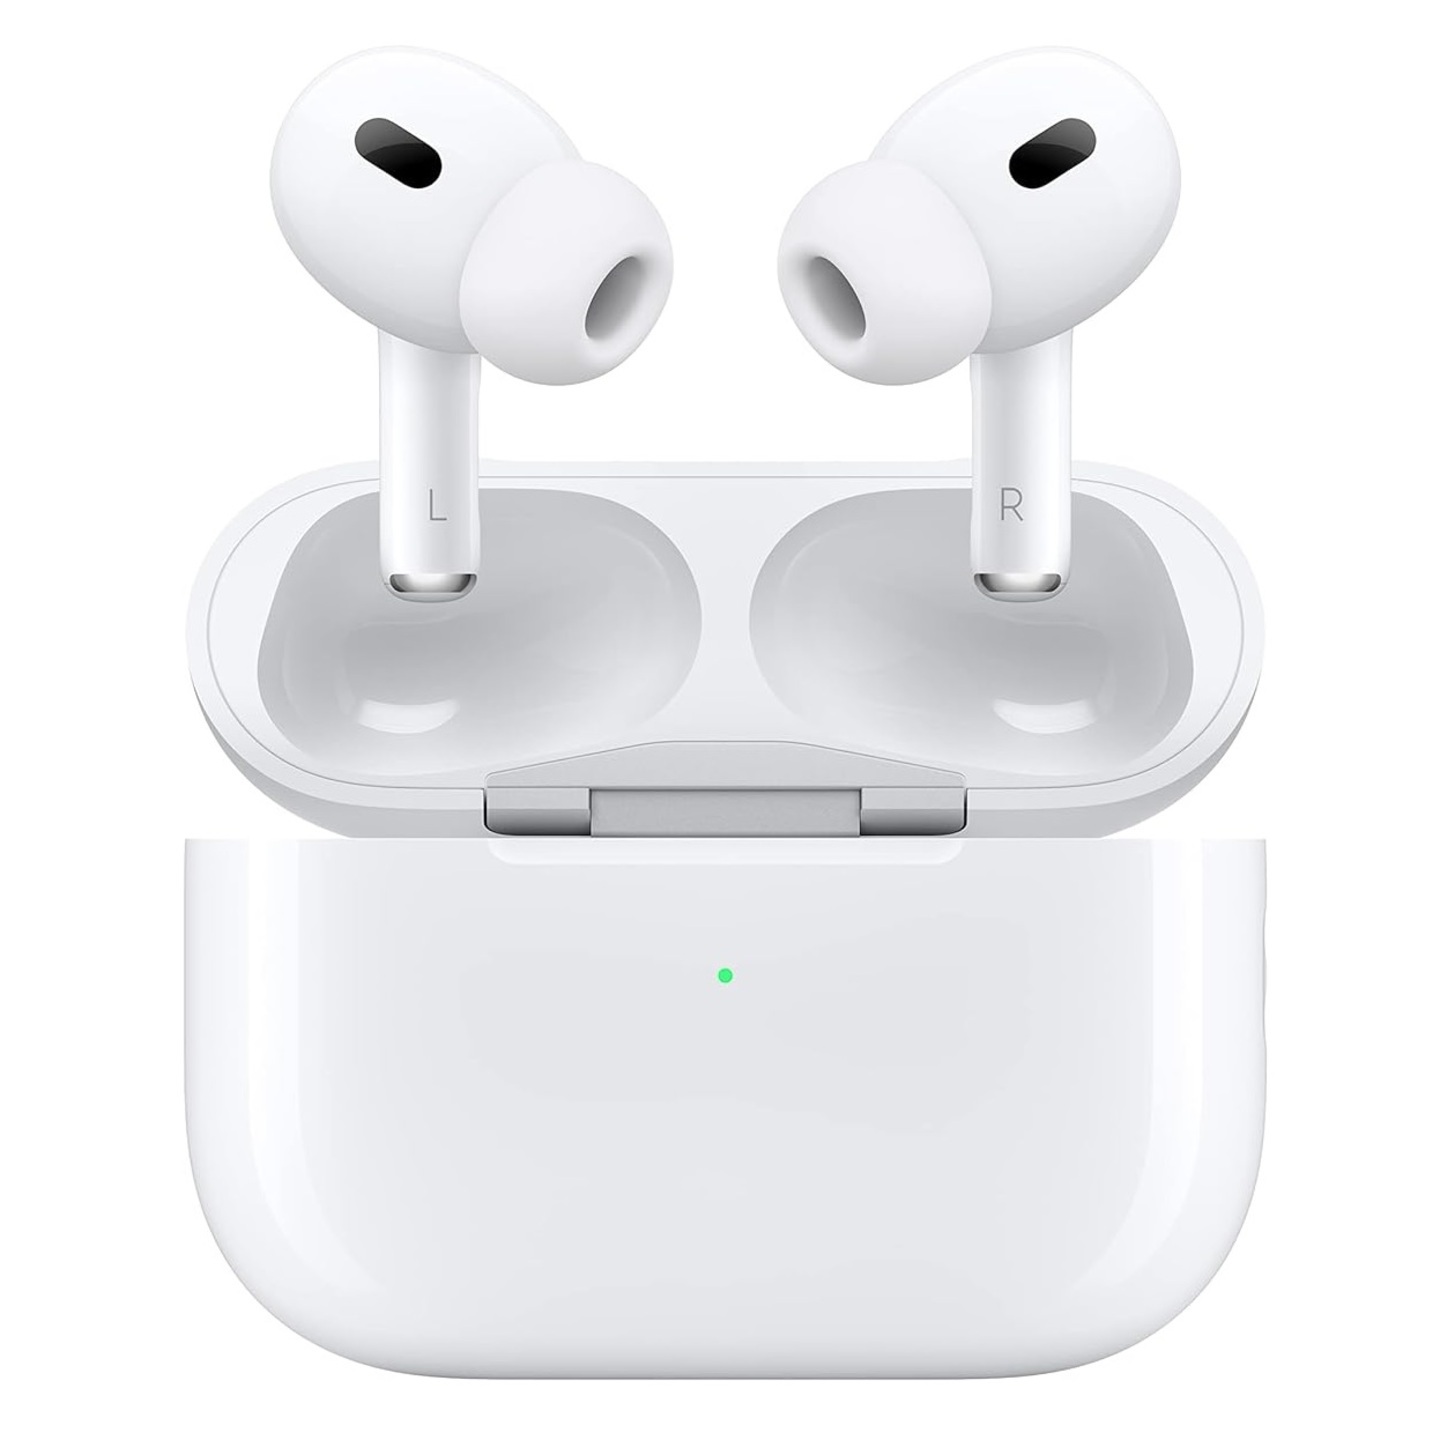 AirPods Pro 2nd Generation with noise cancellation